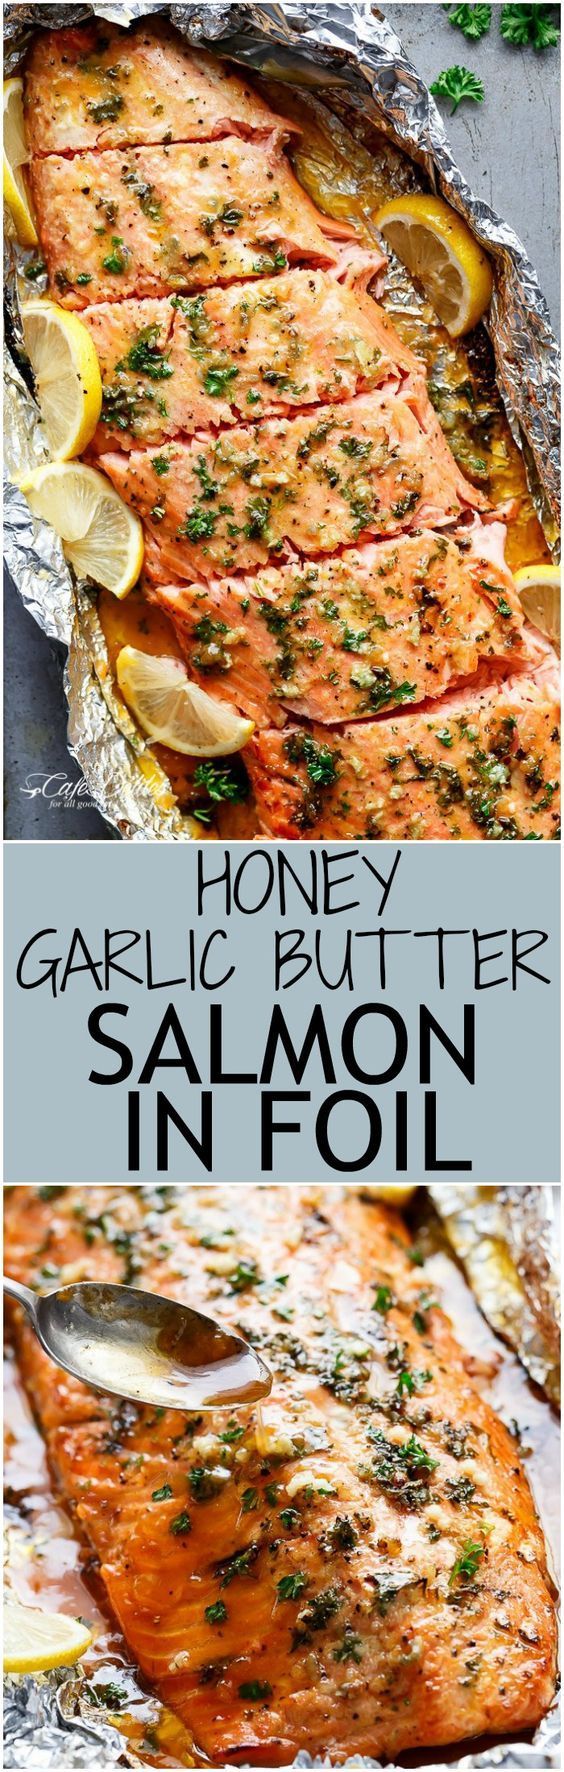 Honey Garlic Butter Salmon In Foil in under 20 minutes, then broiled (or grilled) for that extra golden, crispy and caramelised